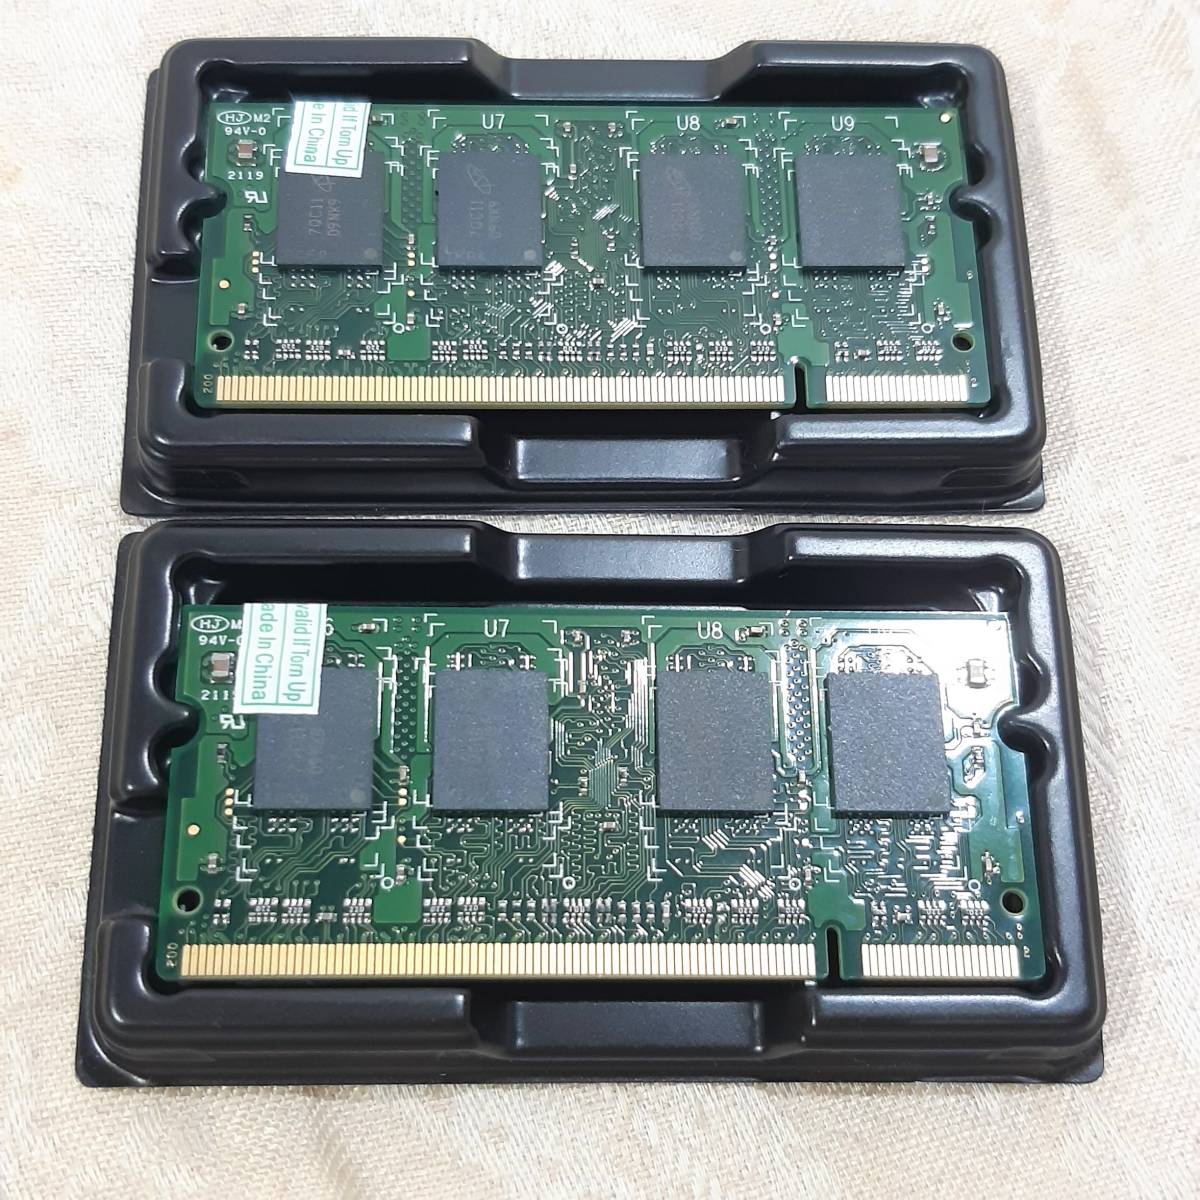  new goods Note PC for memory Micron PC2-6400S DDR2 800MHz 4GB×2 pieces set total 8GB 1R×8 SO-DIMM free shipping 